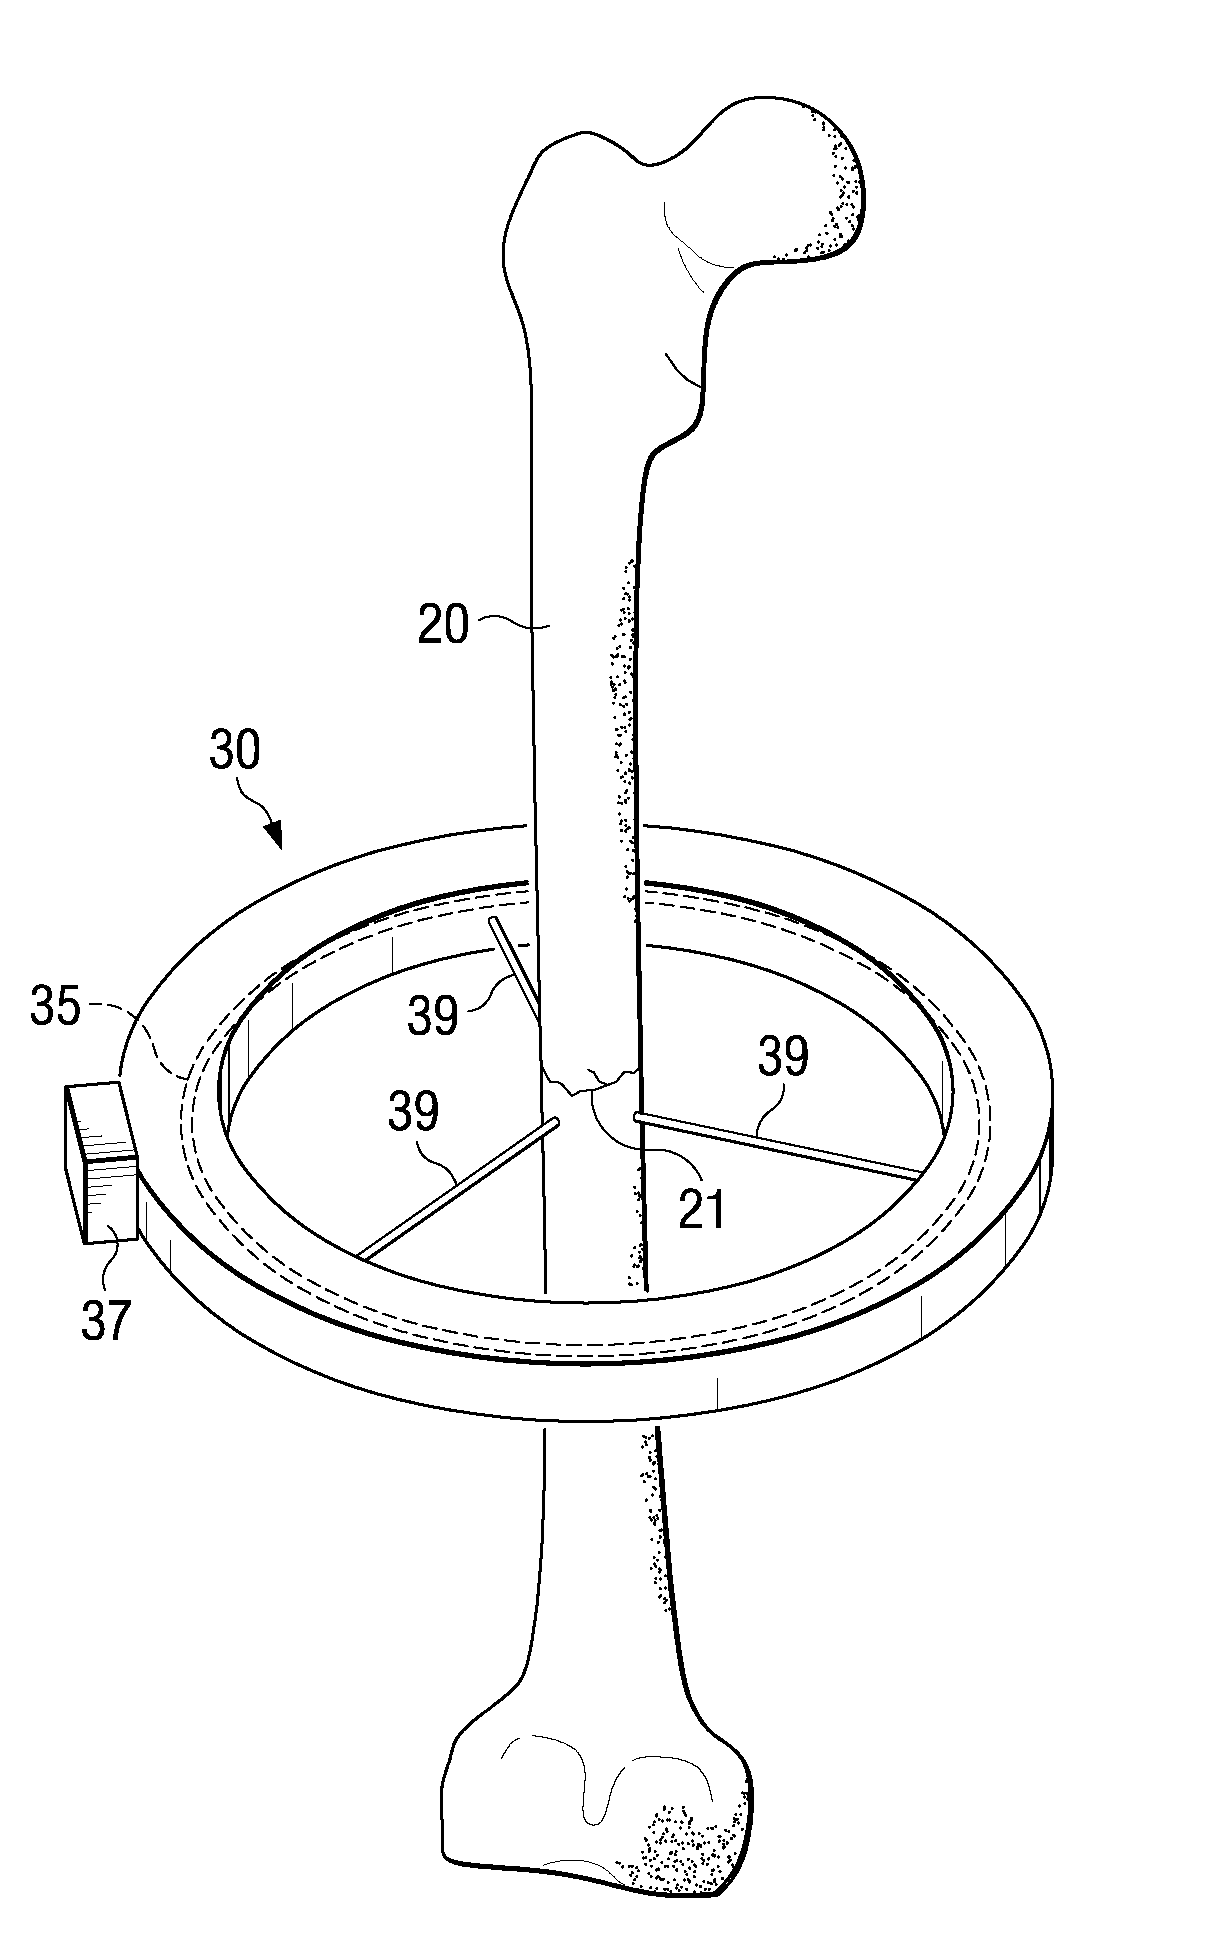 Encompassing external fixation device with incorporated pemf coil